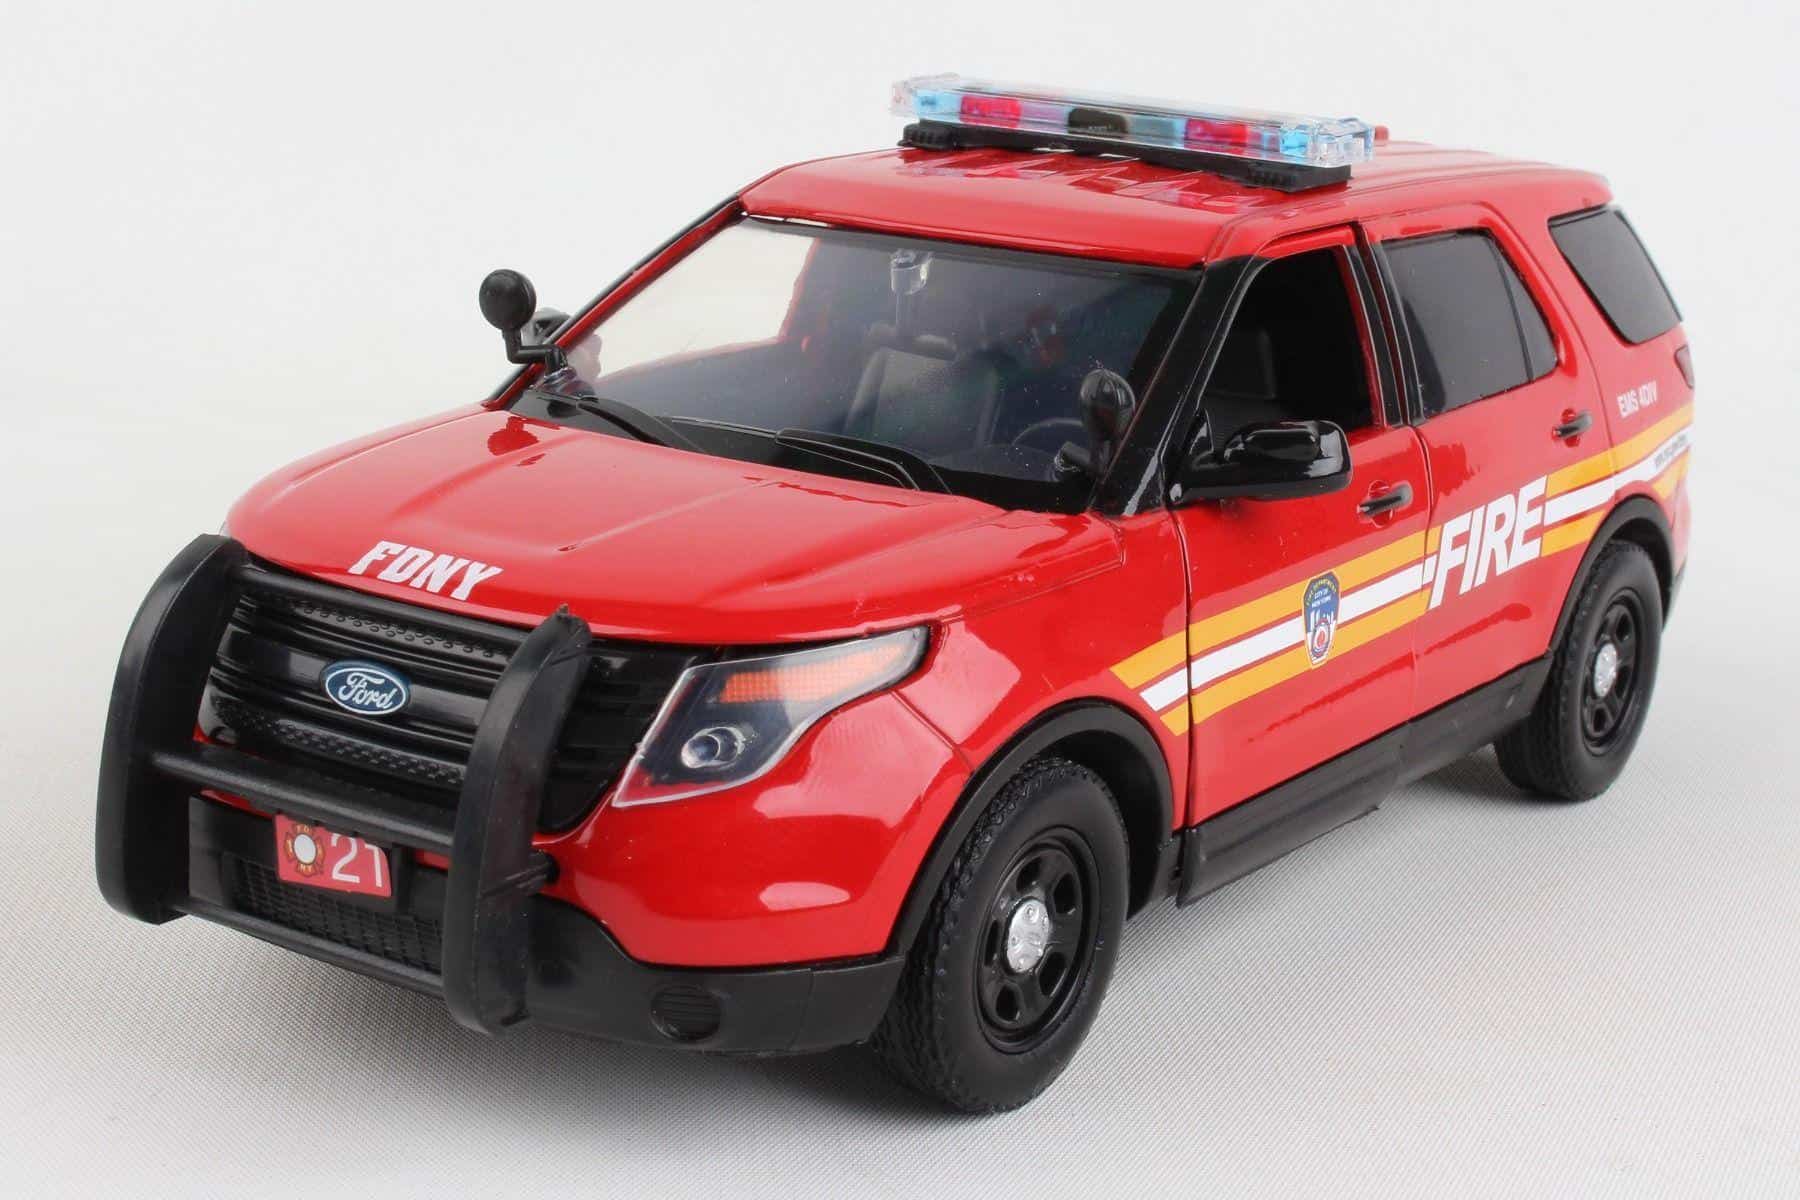 Ford Red Fire Engine Truck Model - Gift Ideas - Automotive Models